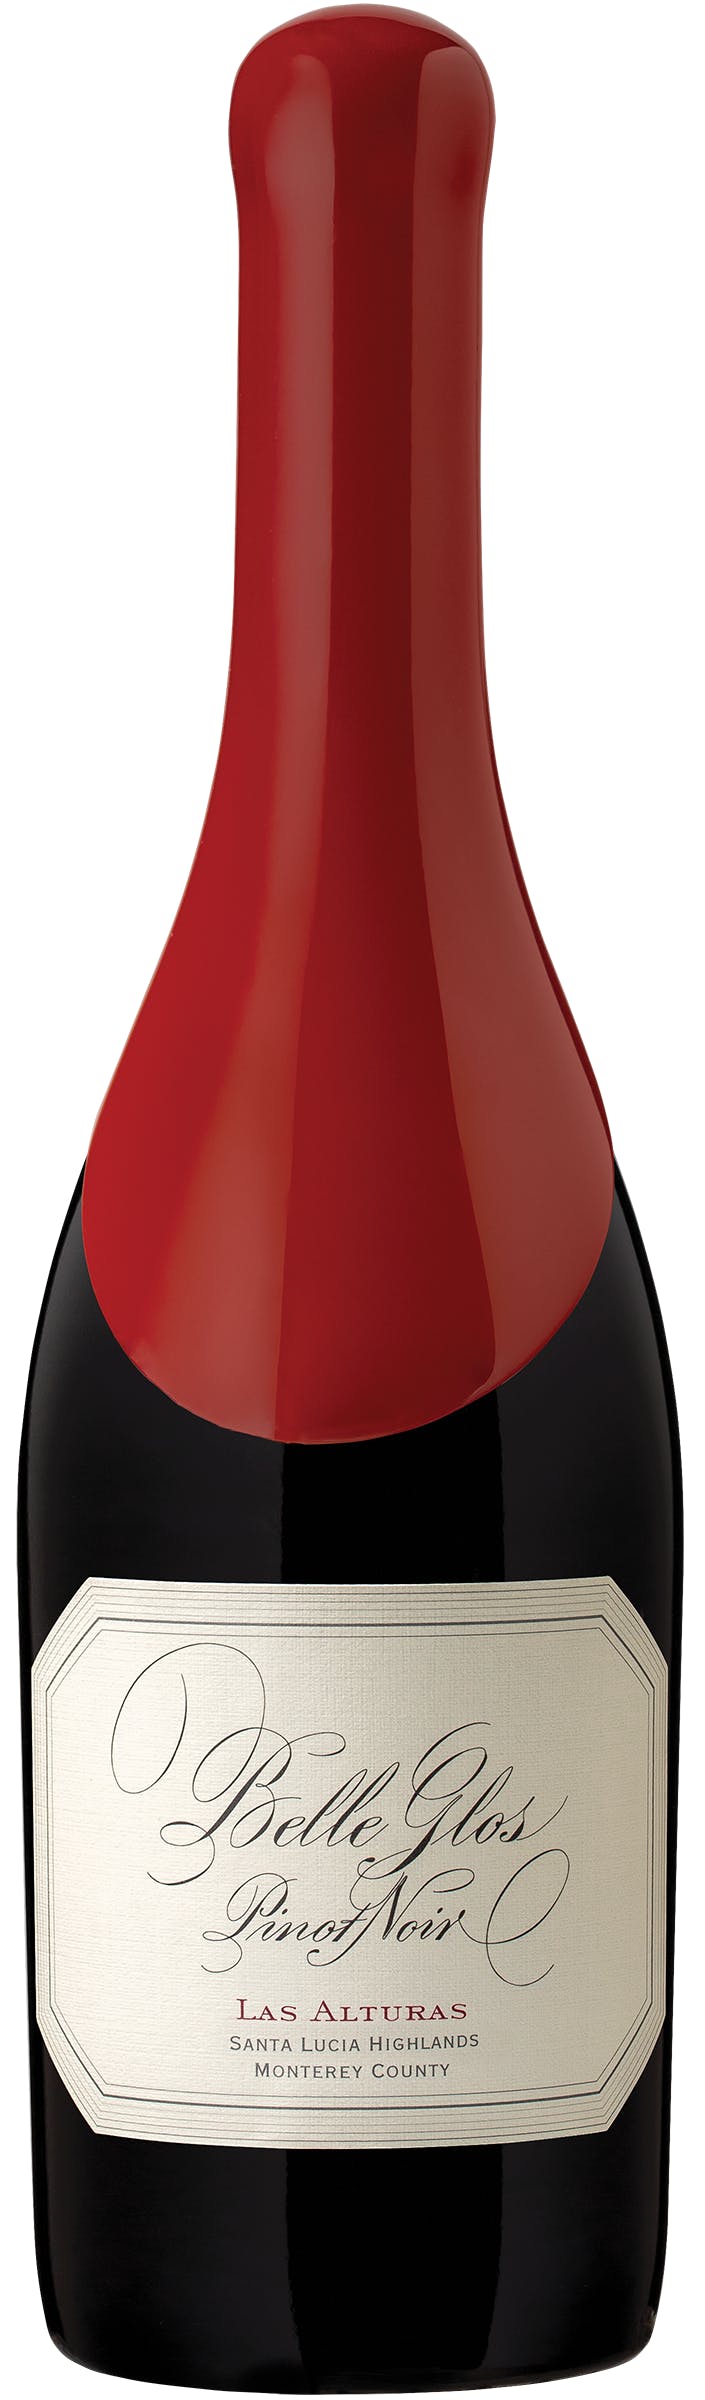 Belle Glos Clark & Telephone Pinot Noir Wine 2022, Bold and Intense Red  Wine